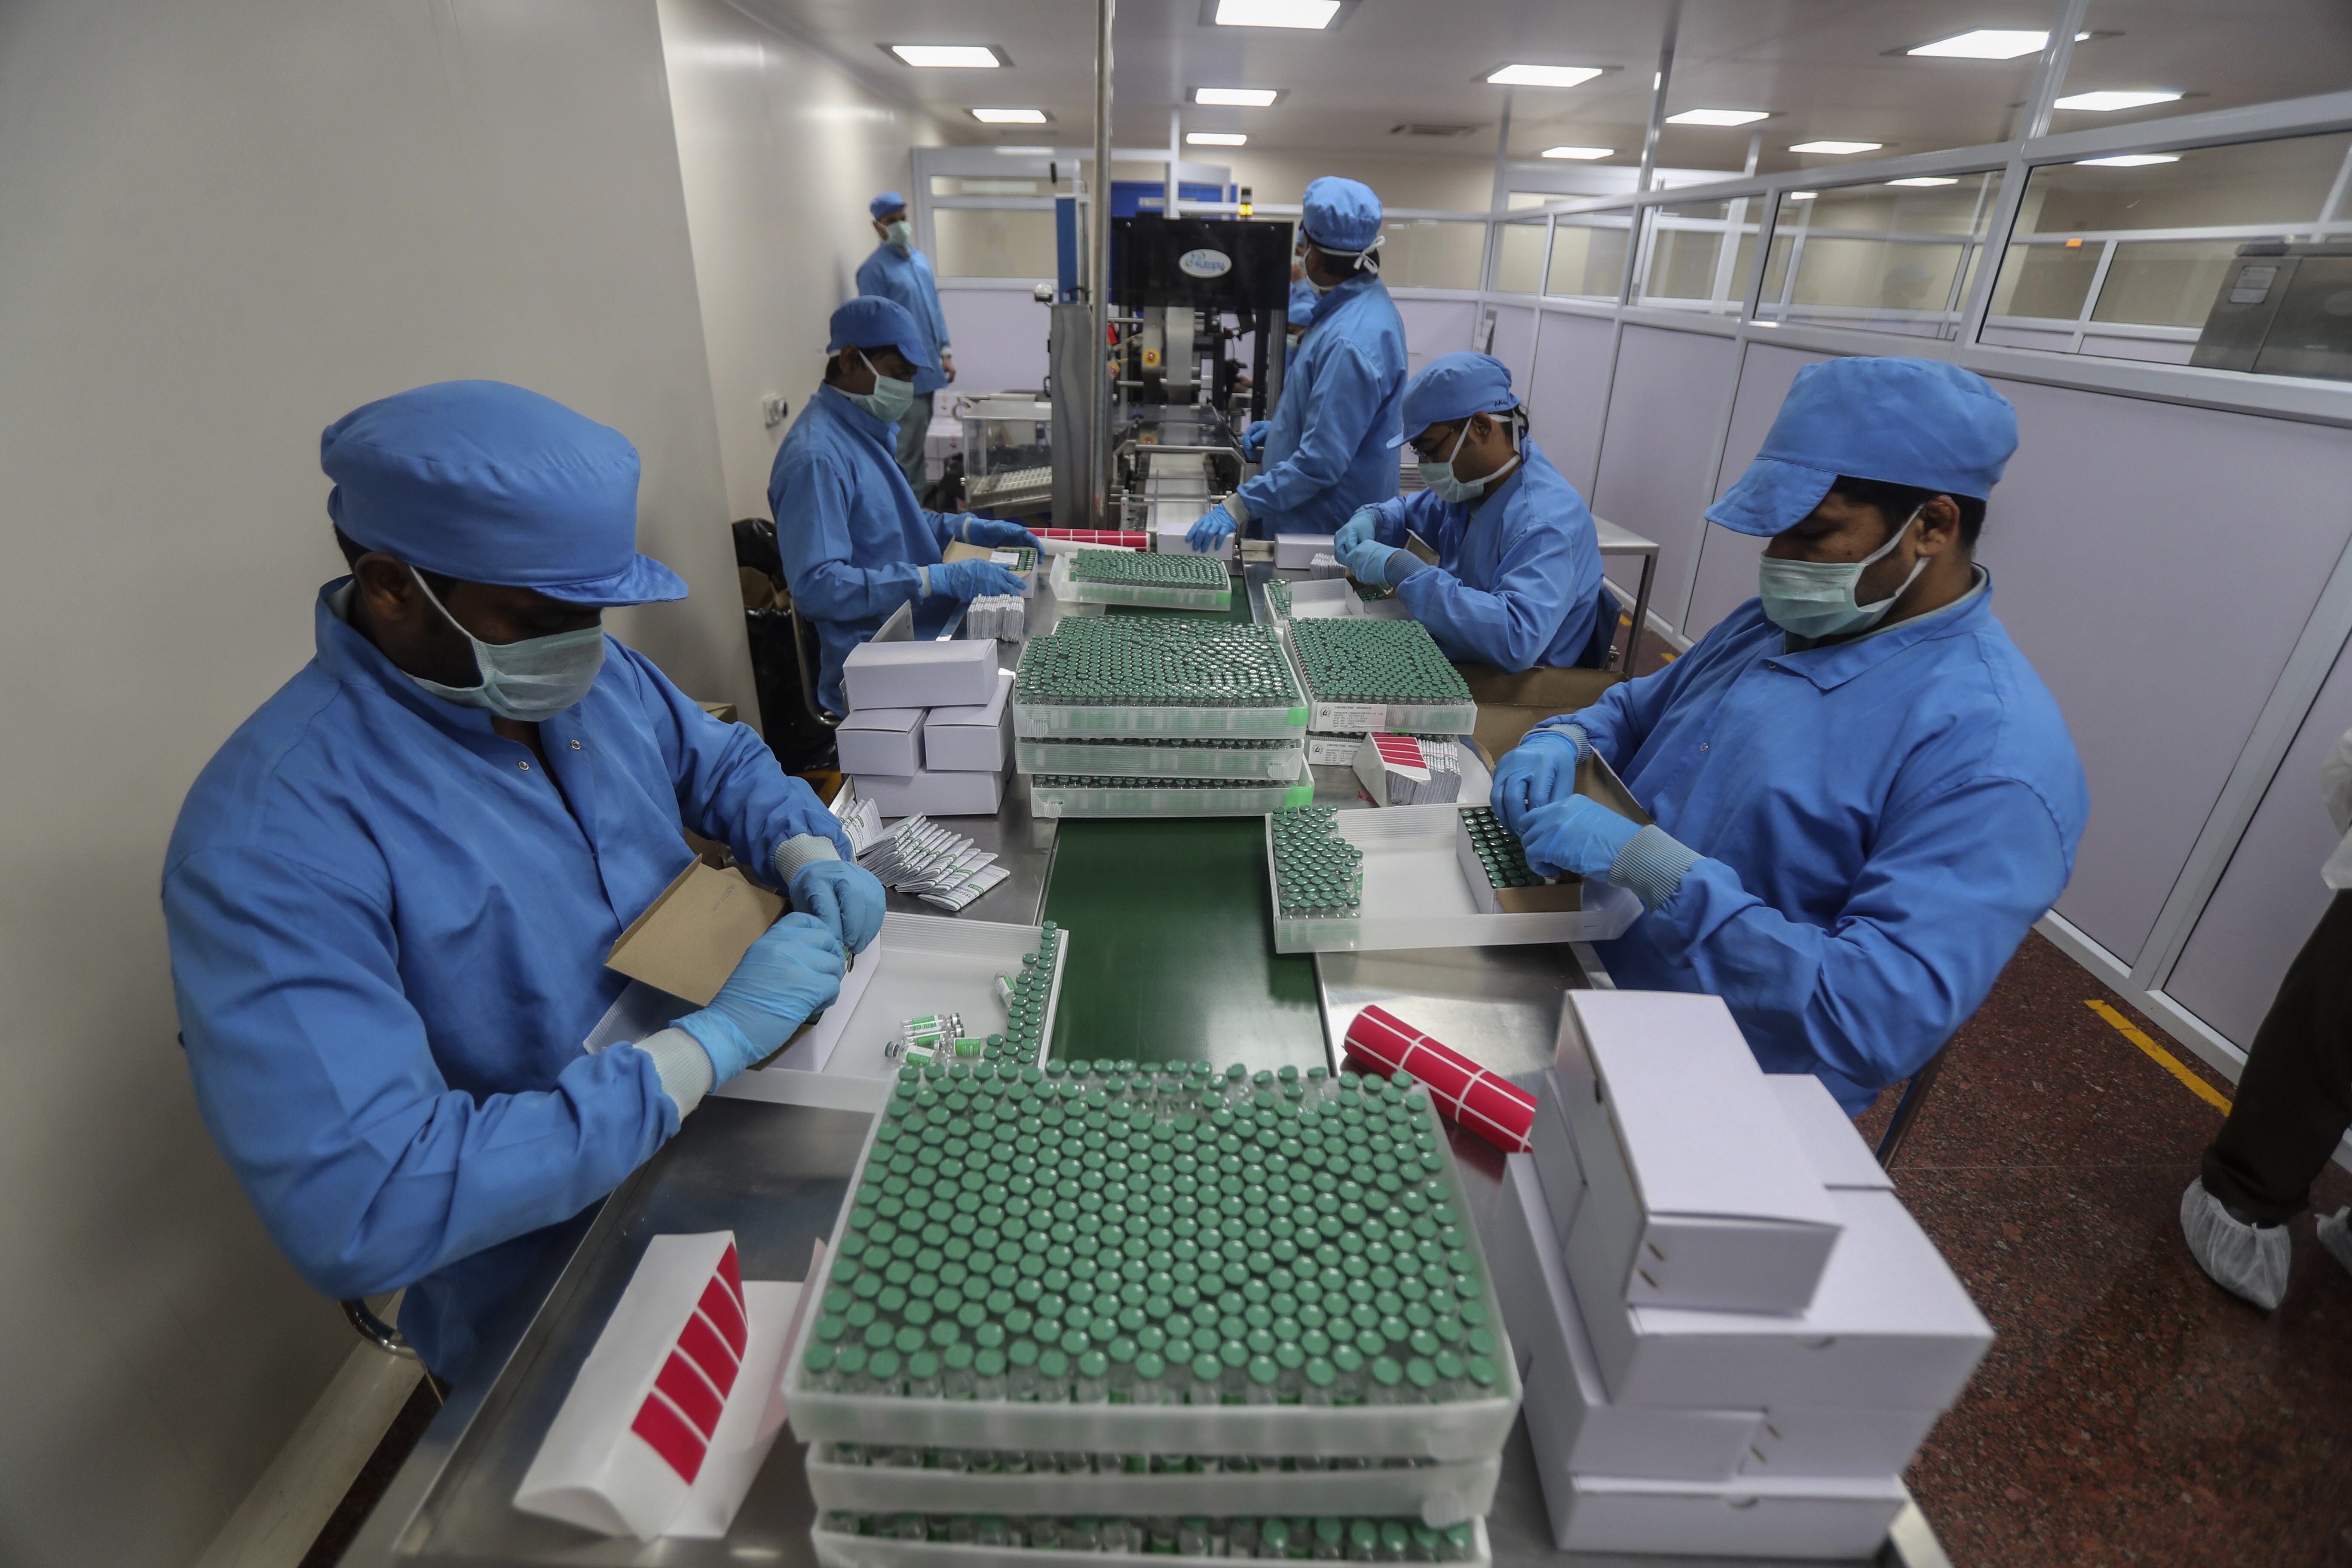 Workers pack boxes containing vials of Covishield, a version of the AstraZeneca vaccine, at the Serum Institute of India in Pune. Photo: AP